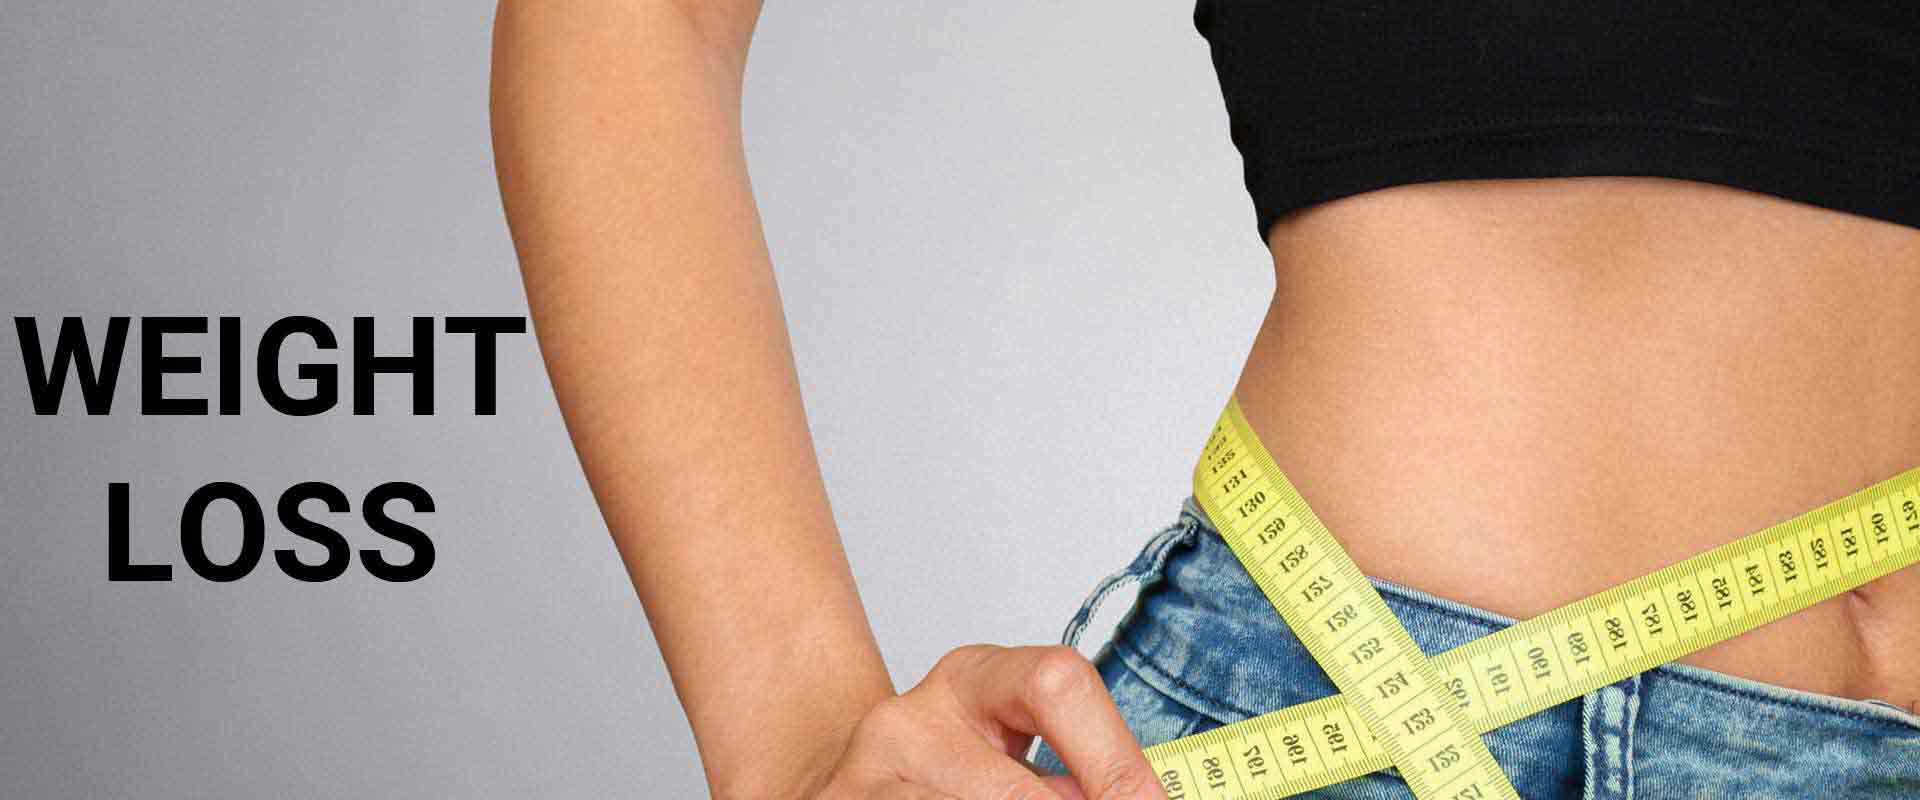 Diet For Weight Loss In Rouyn-Noranda